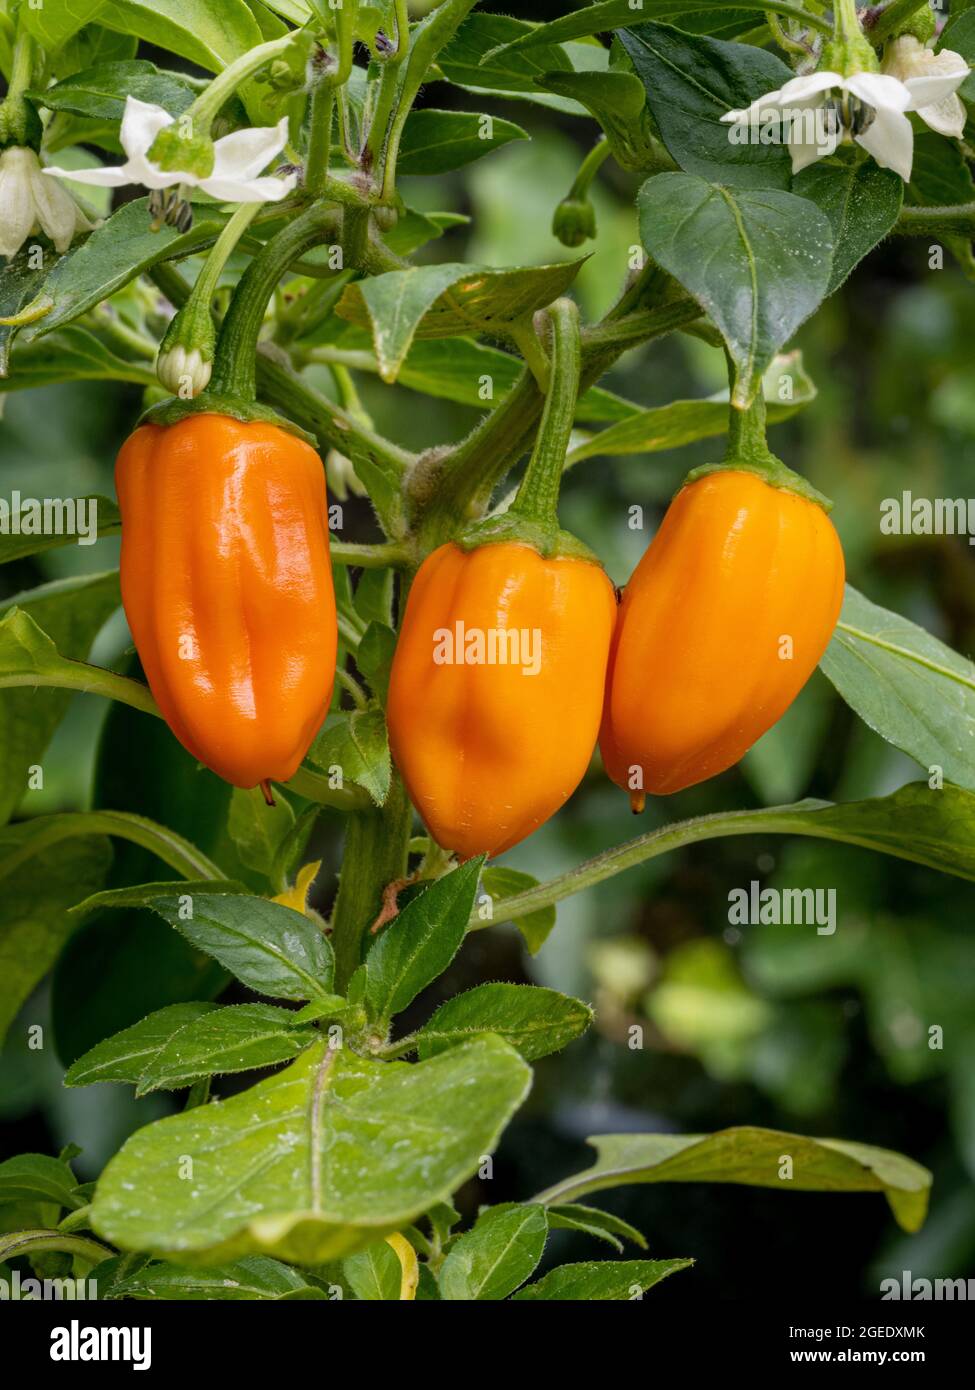 The orange fruits of Capsicum Orange Spice. A hot chilli pepper with green fruits that turn to orange when ripe. Stock Photo